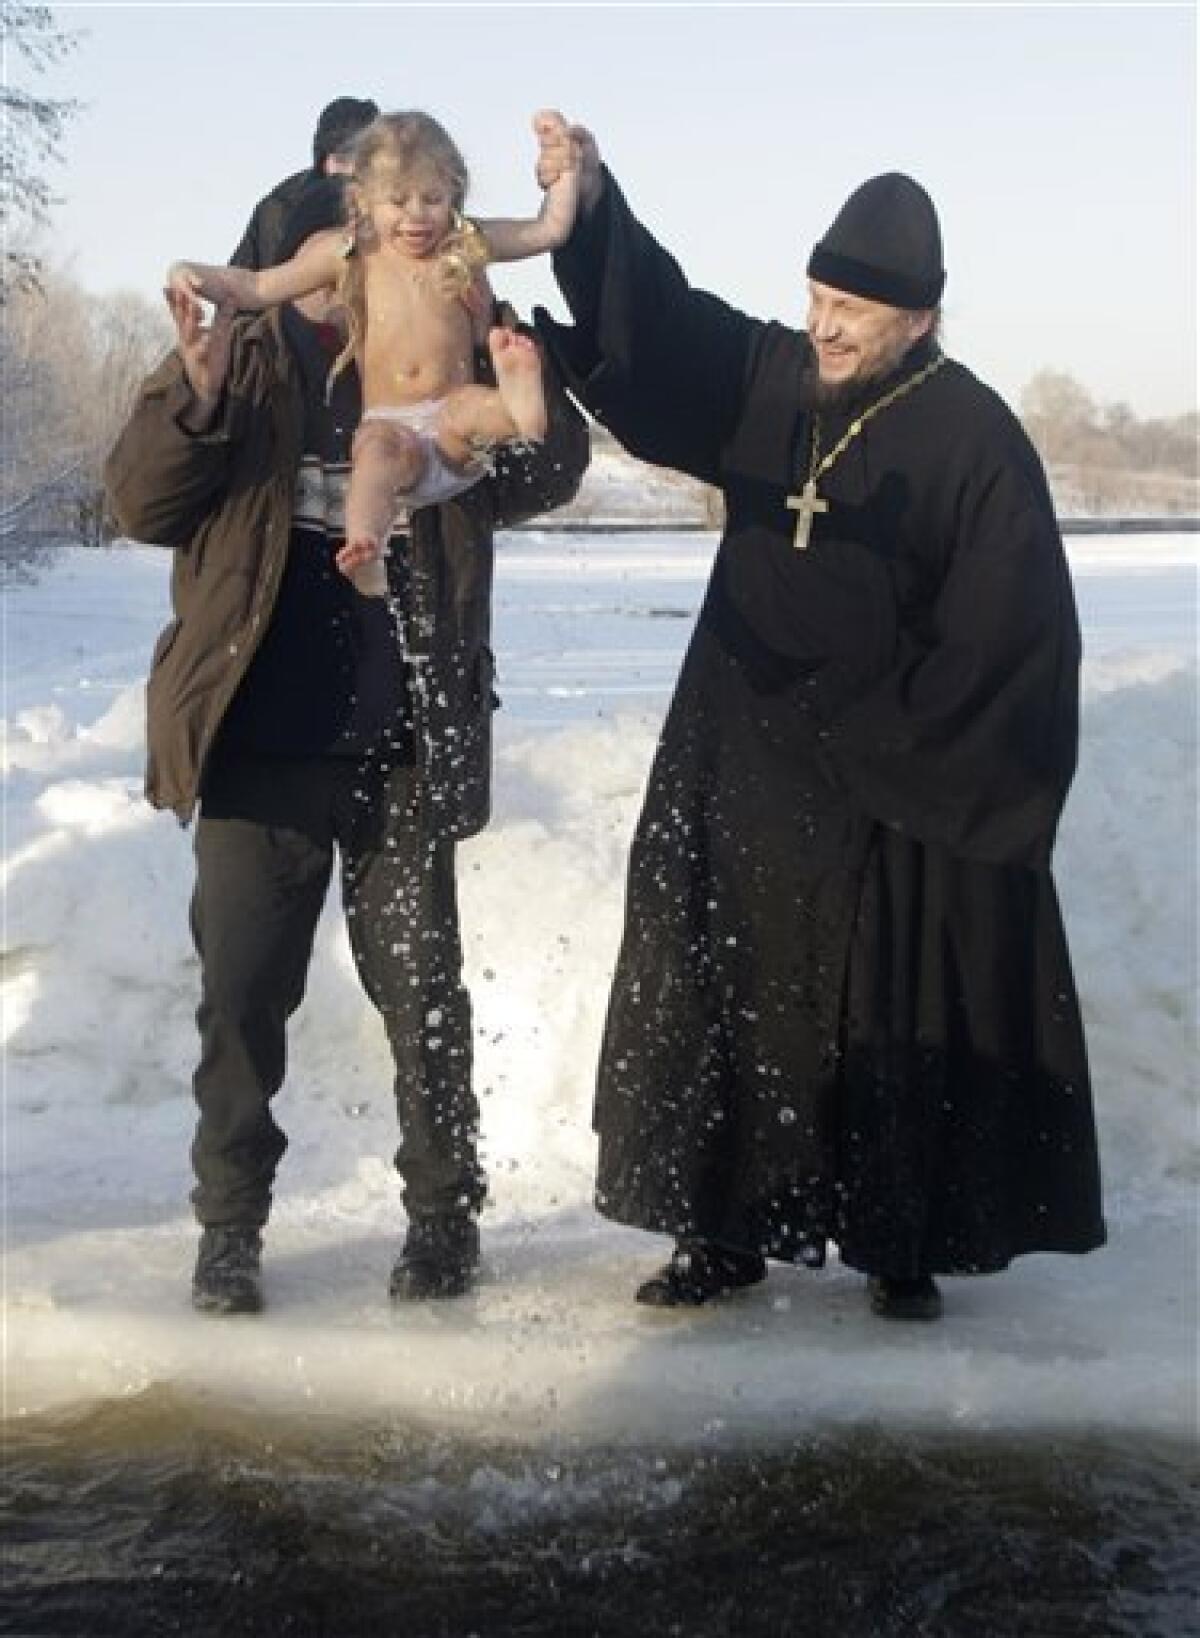 Russian Orthodox priest, right, and believer help a girl to get out of ice cold water after plunging into icy pond to mark the upcoming Epiphany in the northwestern Moscow, Monday, Jan. 18, 2010. Thousands of Russian Orthodox Church followers plunged Monday into icy rivers and ponds across the country to mark the upcoming Epiphany, cleansing themselves with water deemed holy for the day. Water that is blessed by a cleric on Epiphany is considered holy and pure until next year's celebration, and is believed to have special powers of protection and healing. The Russian Orthodox Church follows the old Julian calendar, according to which Epiphany falls on Jan. 19. Moscow temperatures on Monday morning dropped to -20 Celsius (-4 Farenheit). (AP Photo/Mikhail Metzel) — AP